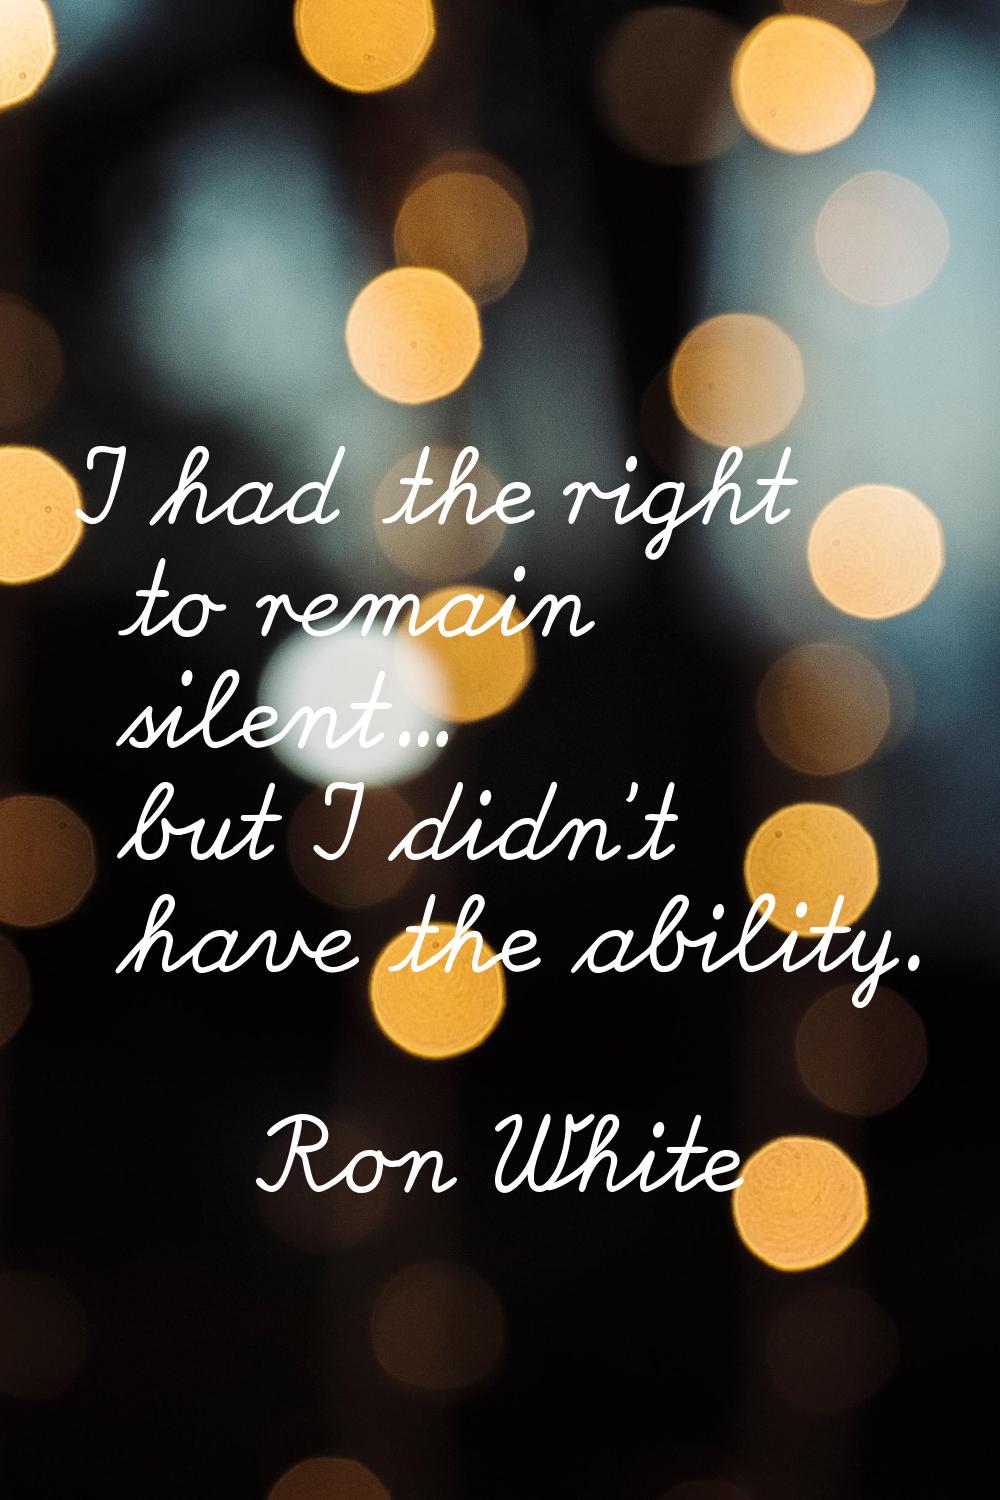 I had the right to remain silent... but I didn't have the ability.